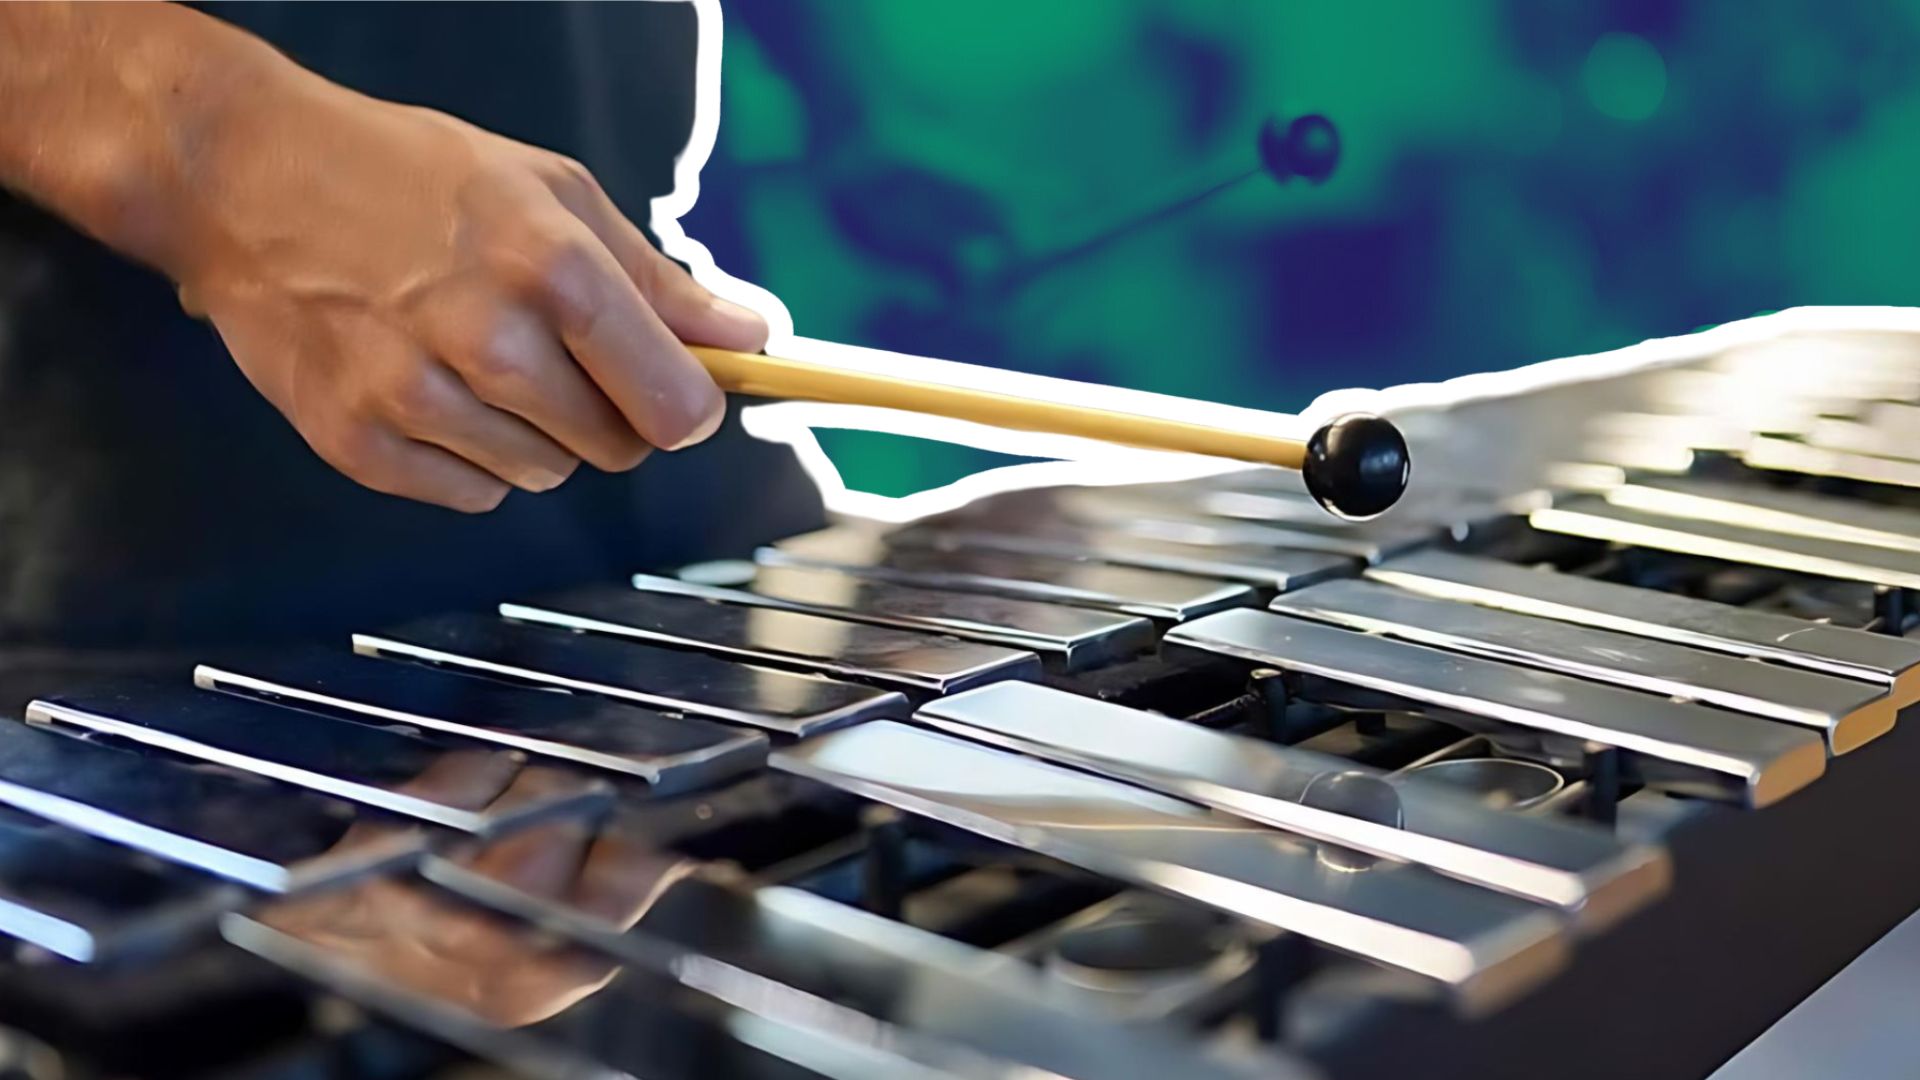 Xylophone: A Musical Instrument That Starts with X